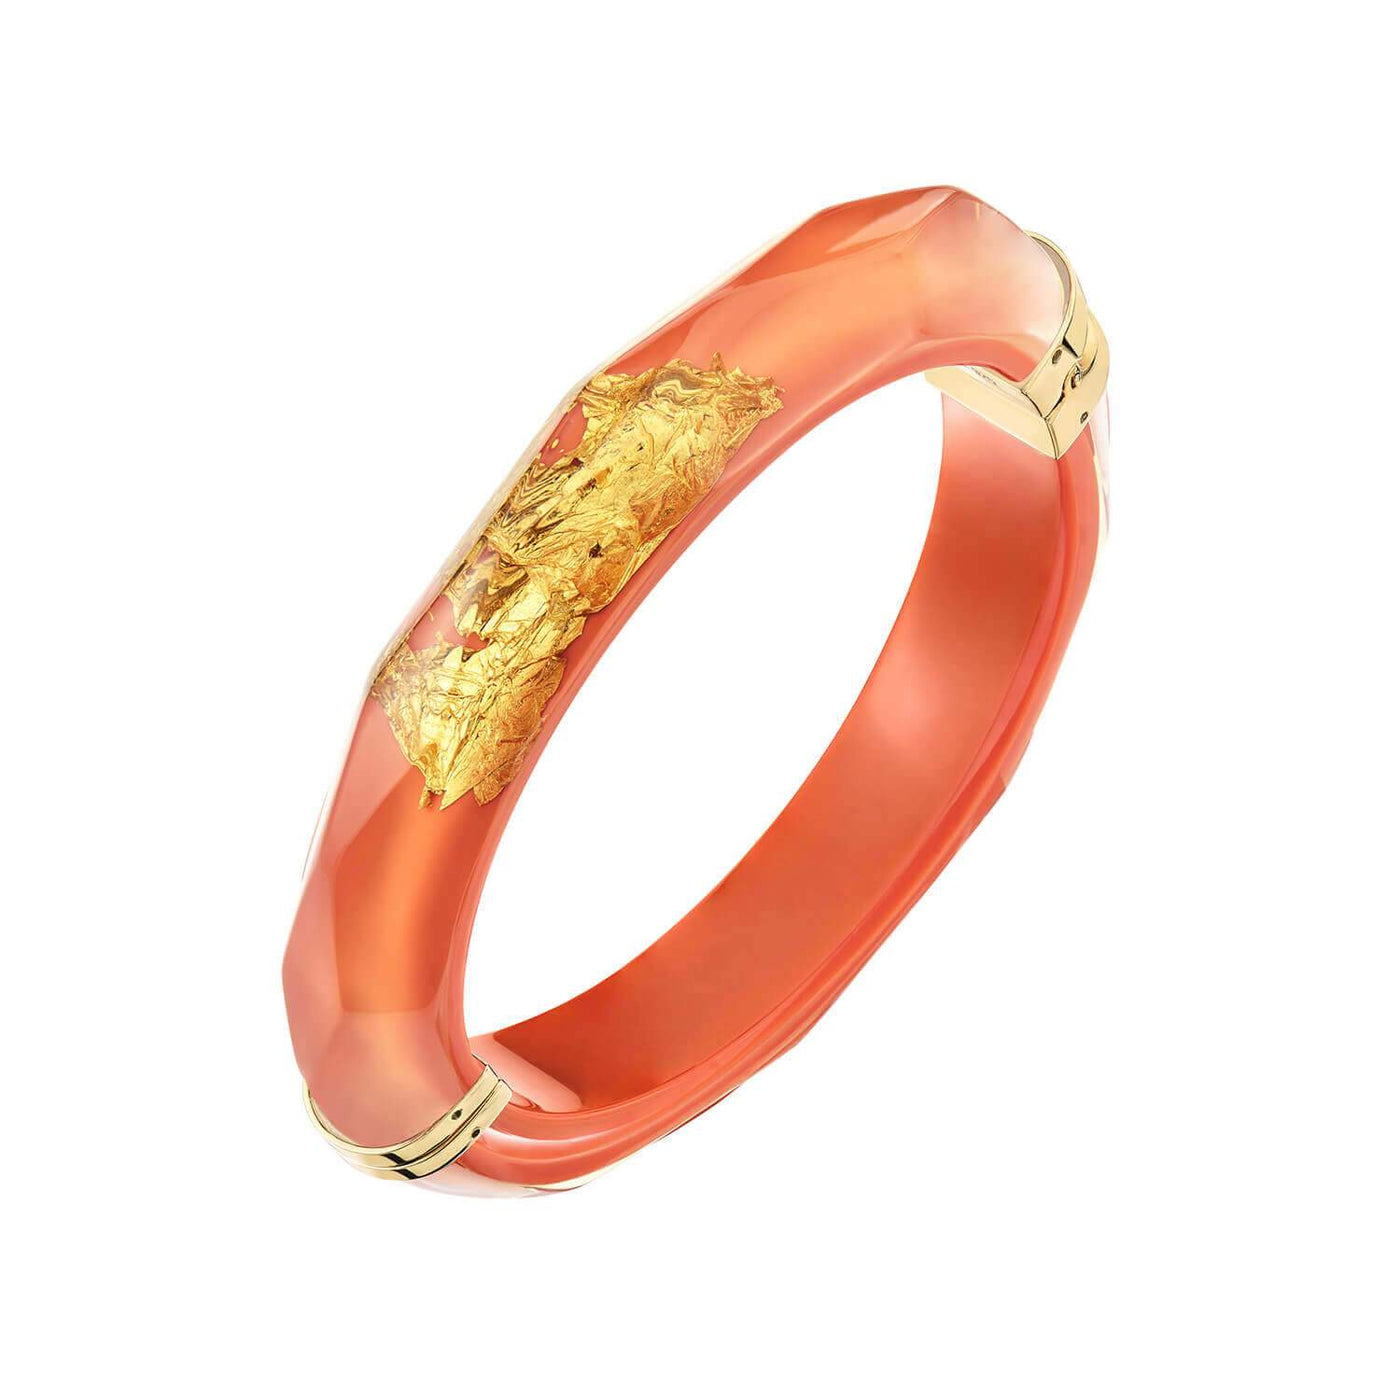 24K Gold Leaf Thin Faceted Lucite Bangle - LIVING CORAL